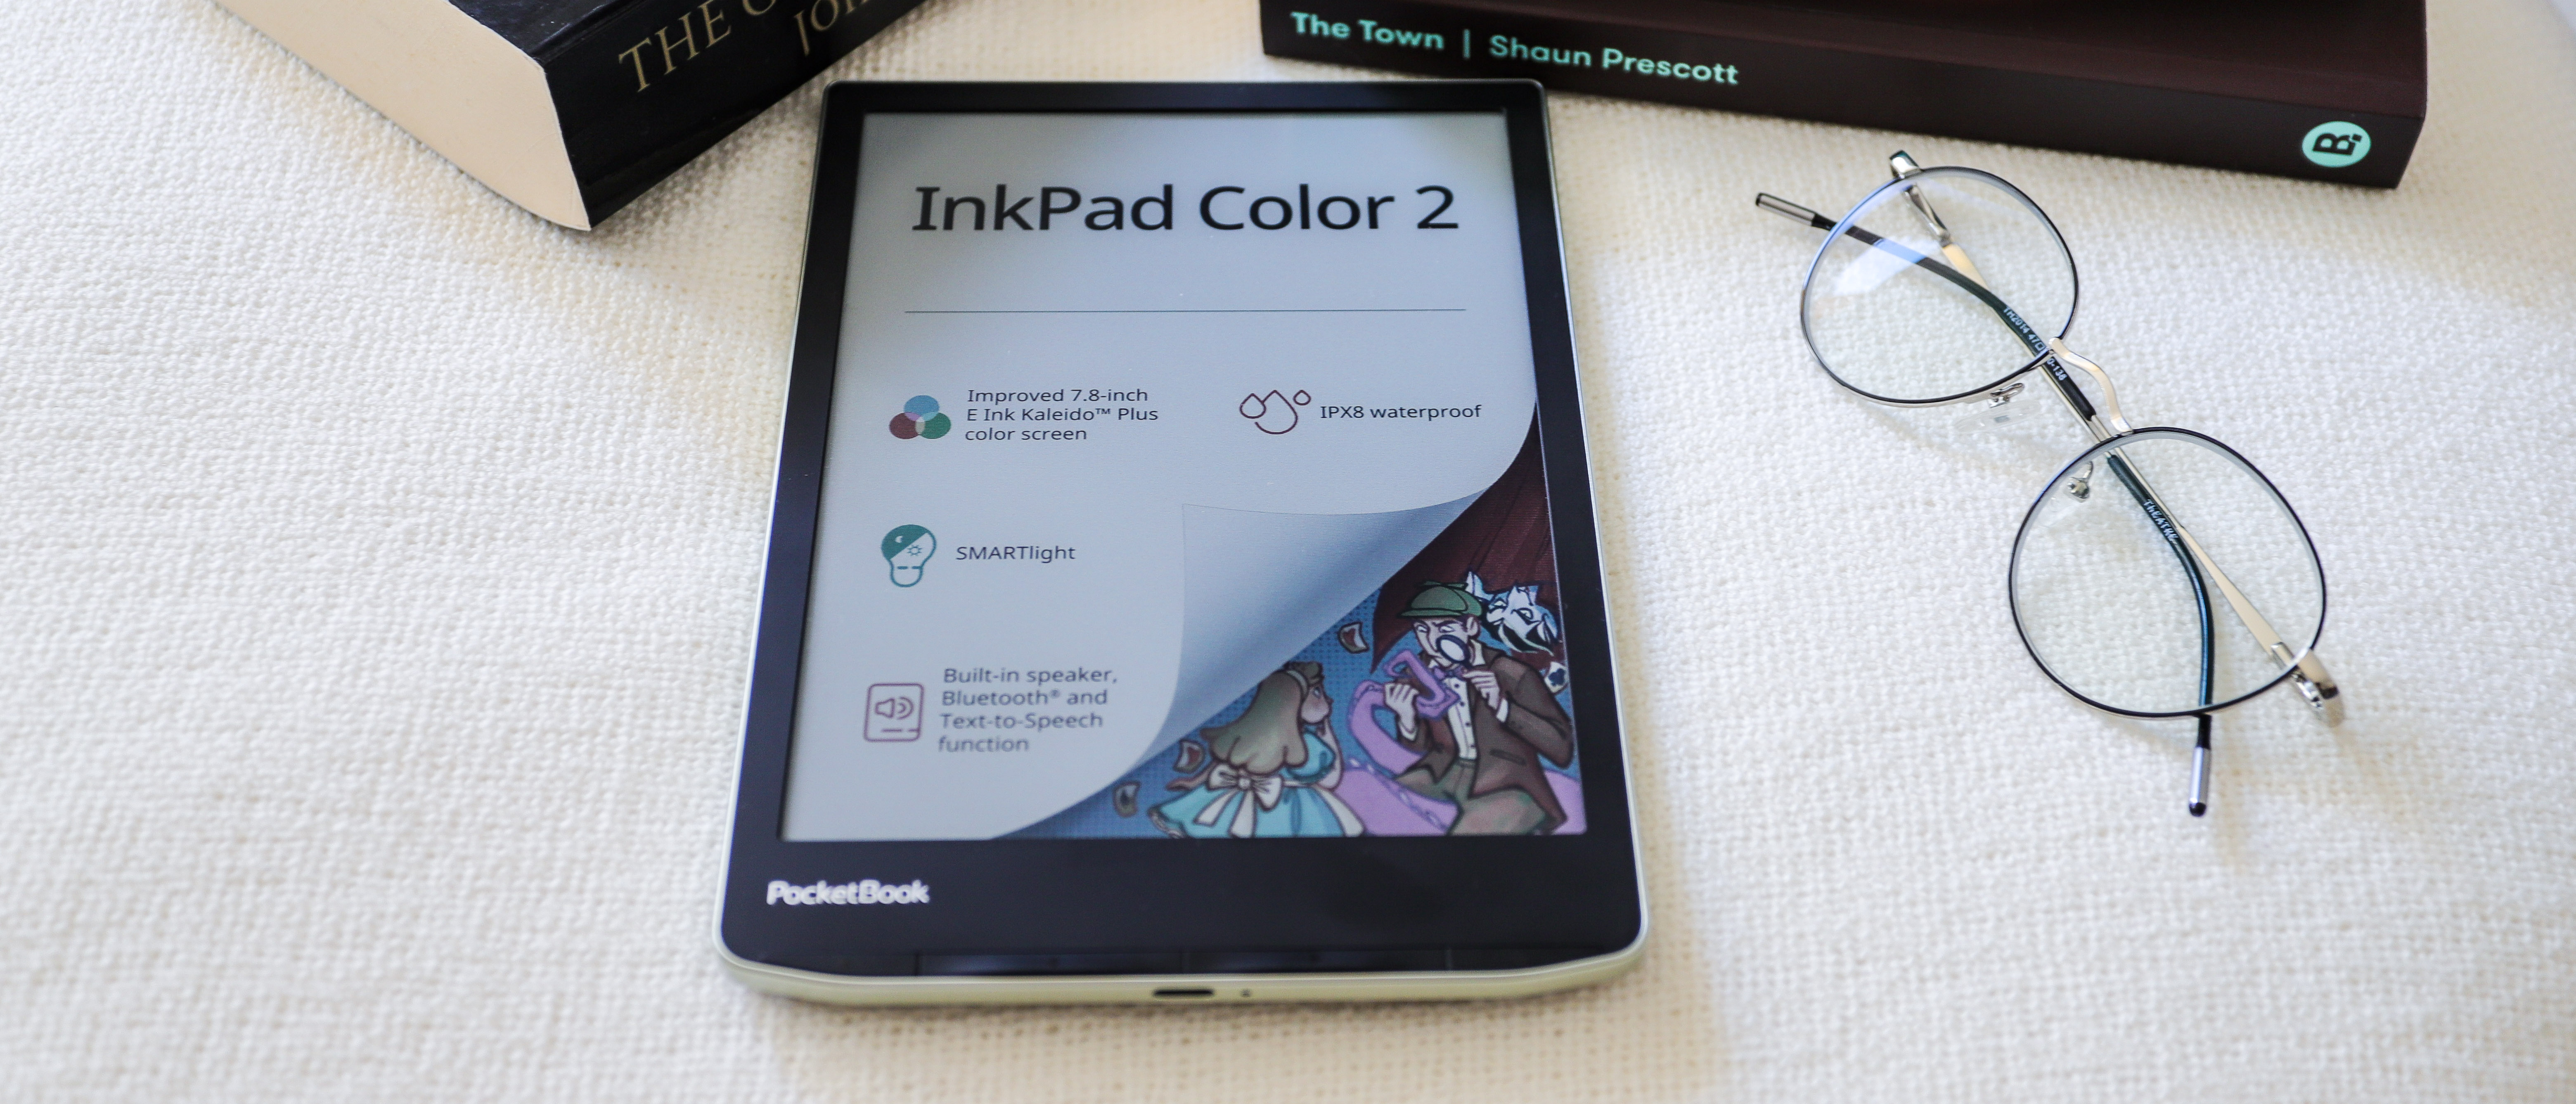 First look at the Pocketbook InkPad Color 2 e-Reader - Good e-Reader